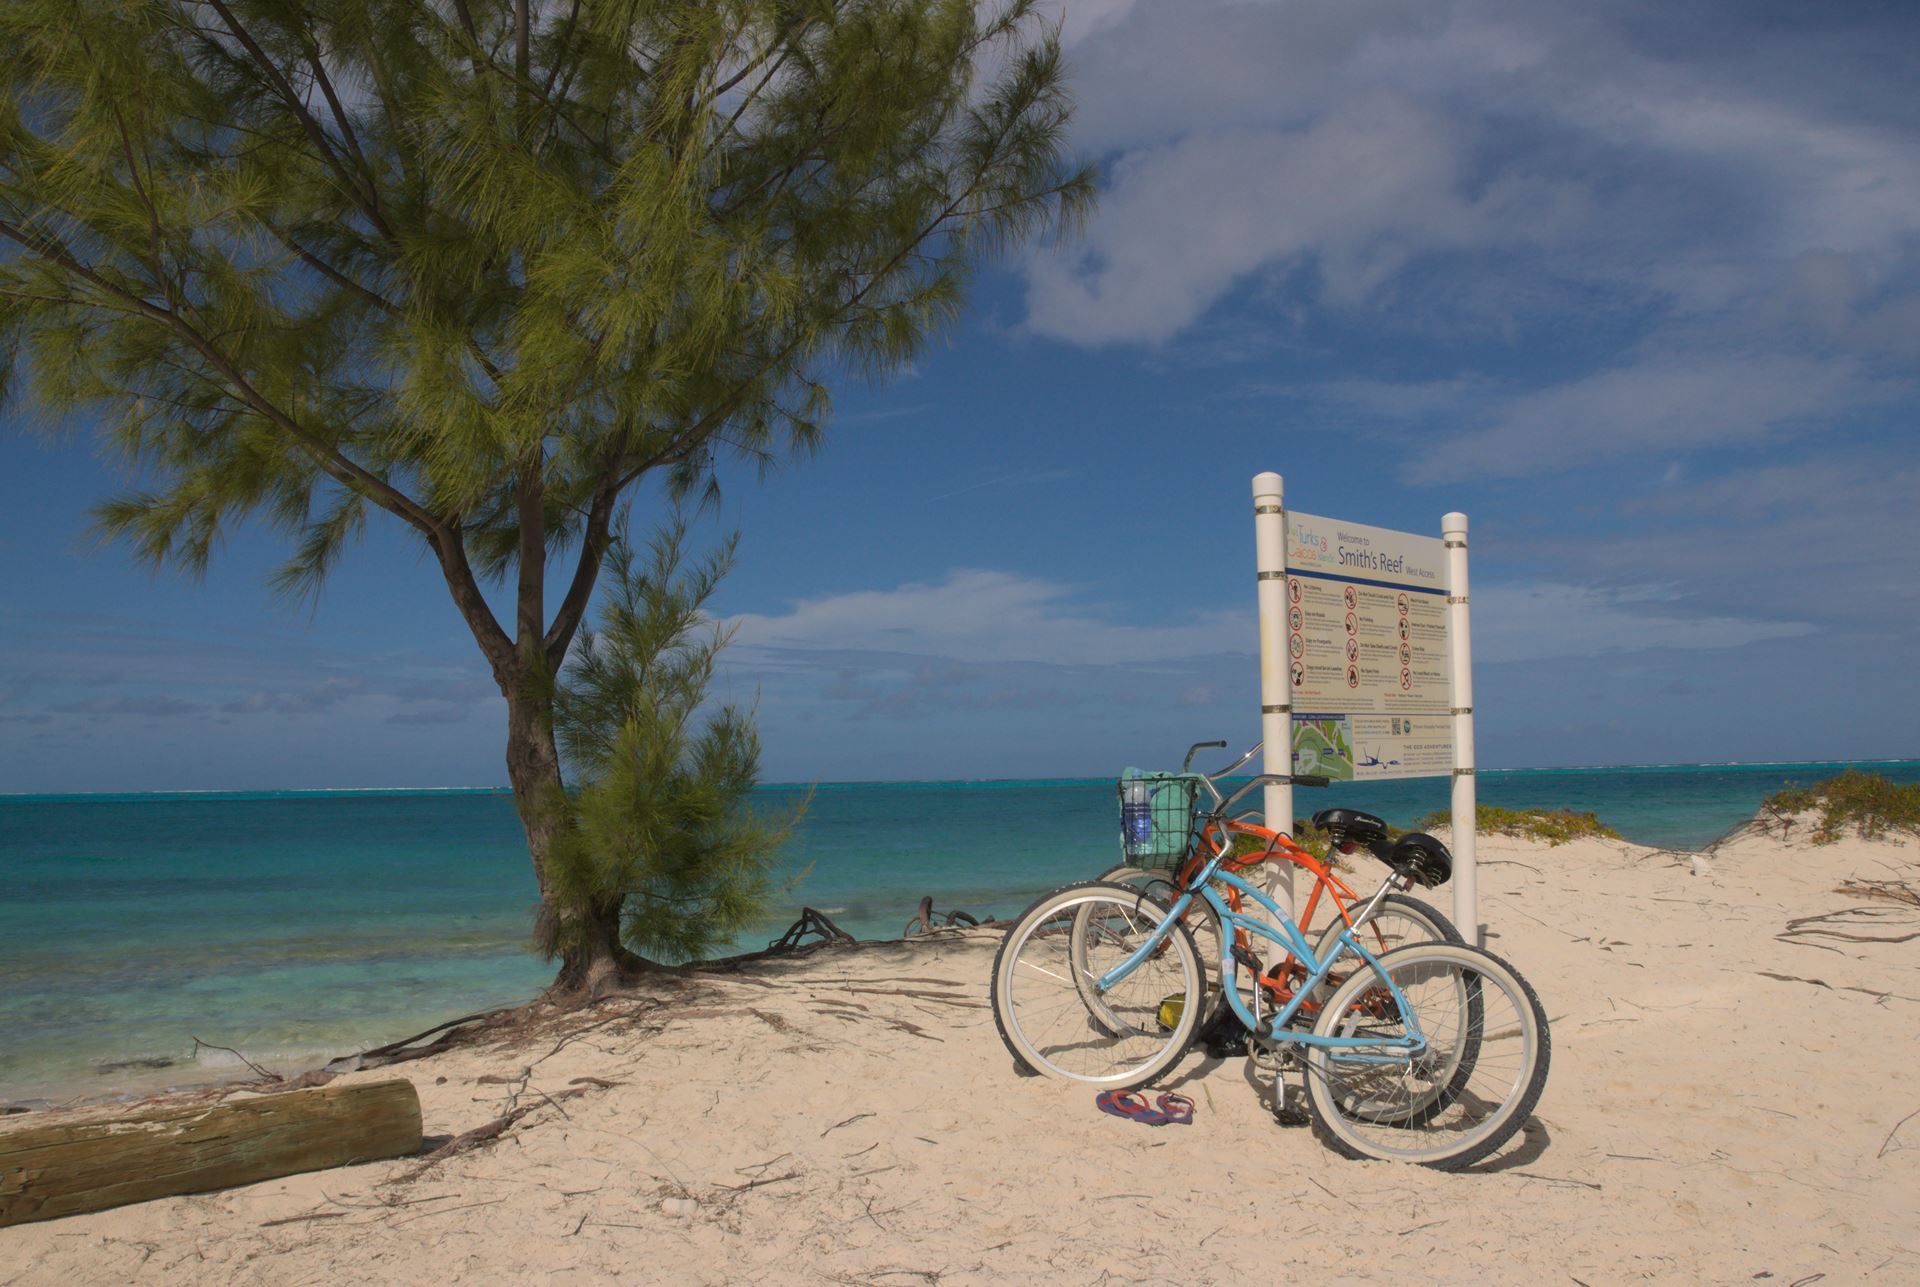 Two bicycles leaning against a sign, plus a tree, all on a white beach, with ocean and sky in the background